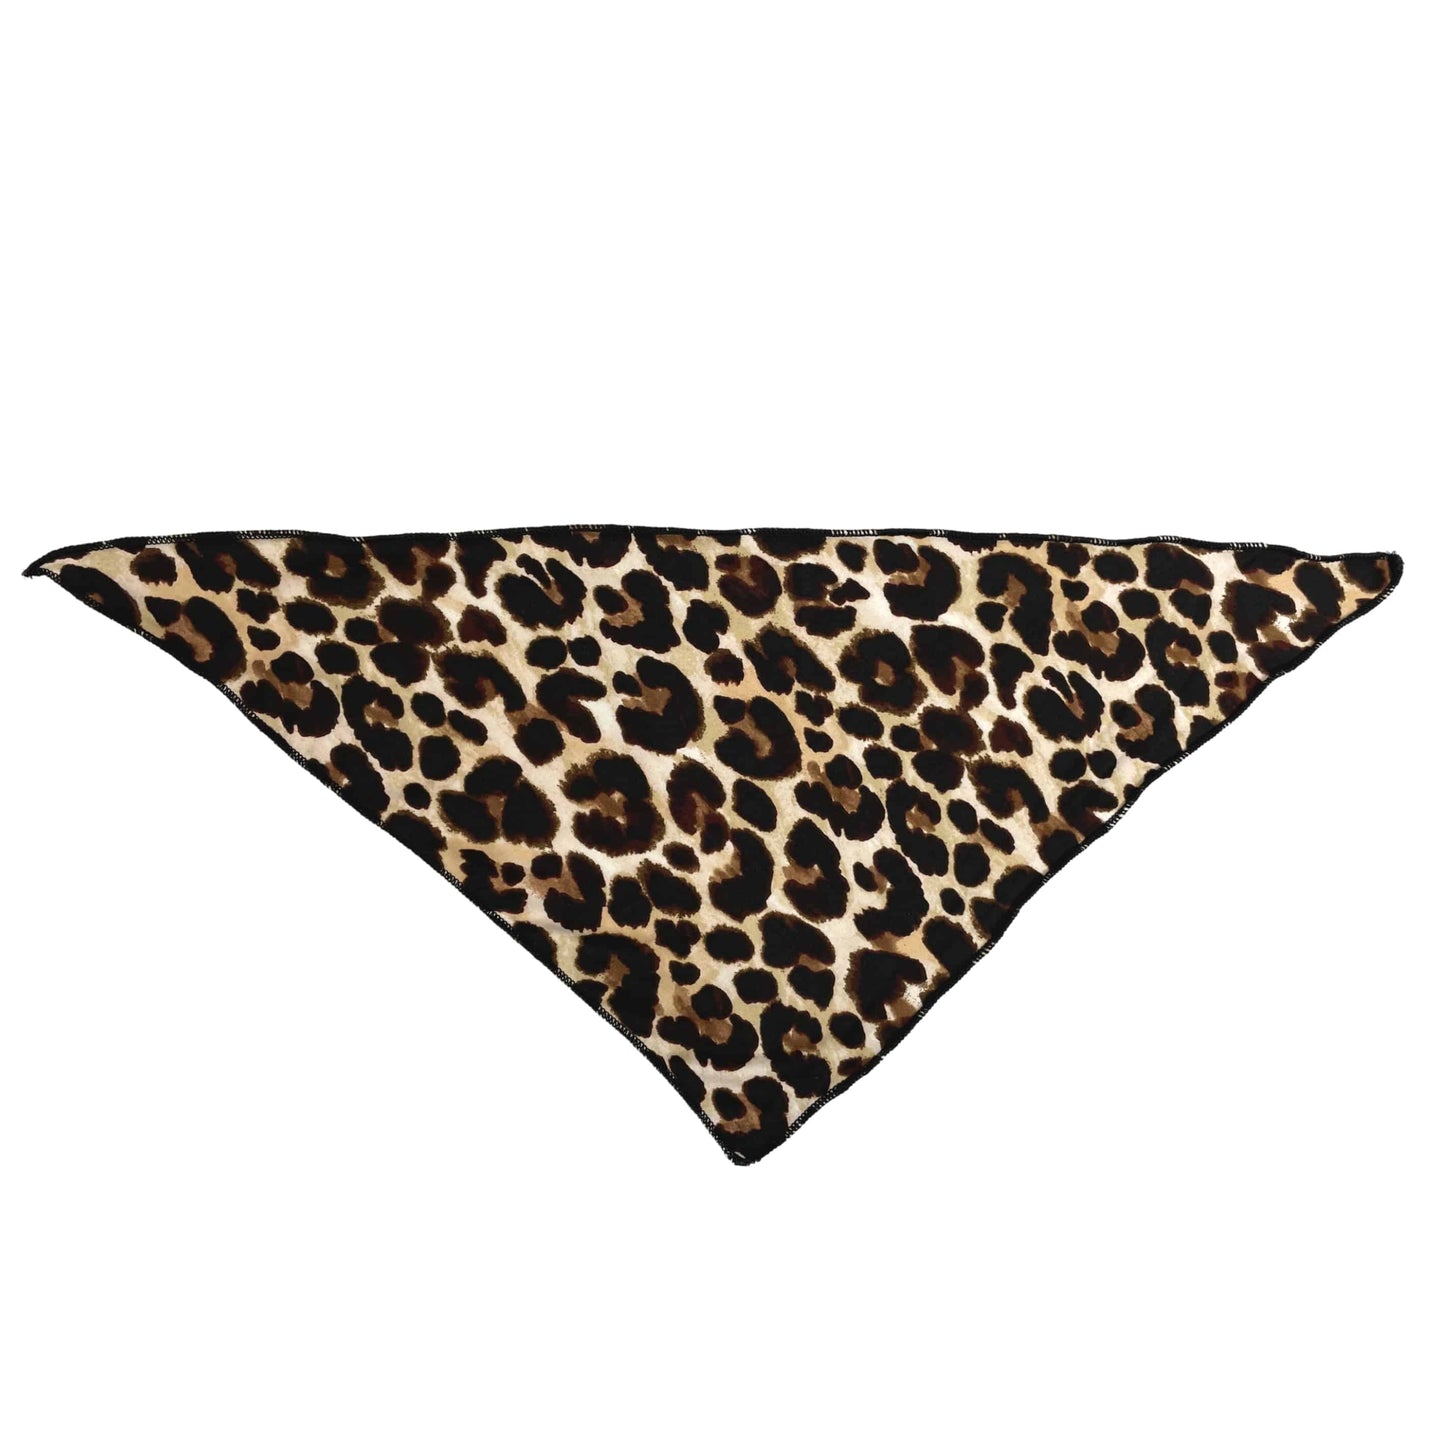 Triangle bandana made of stretchy knit polyester, printed with taupe leopard pattern.